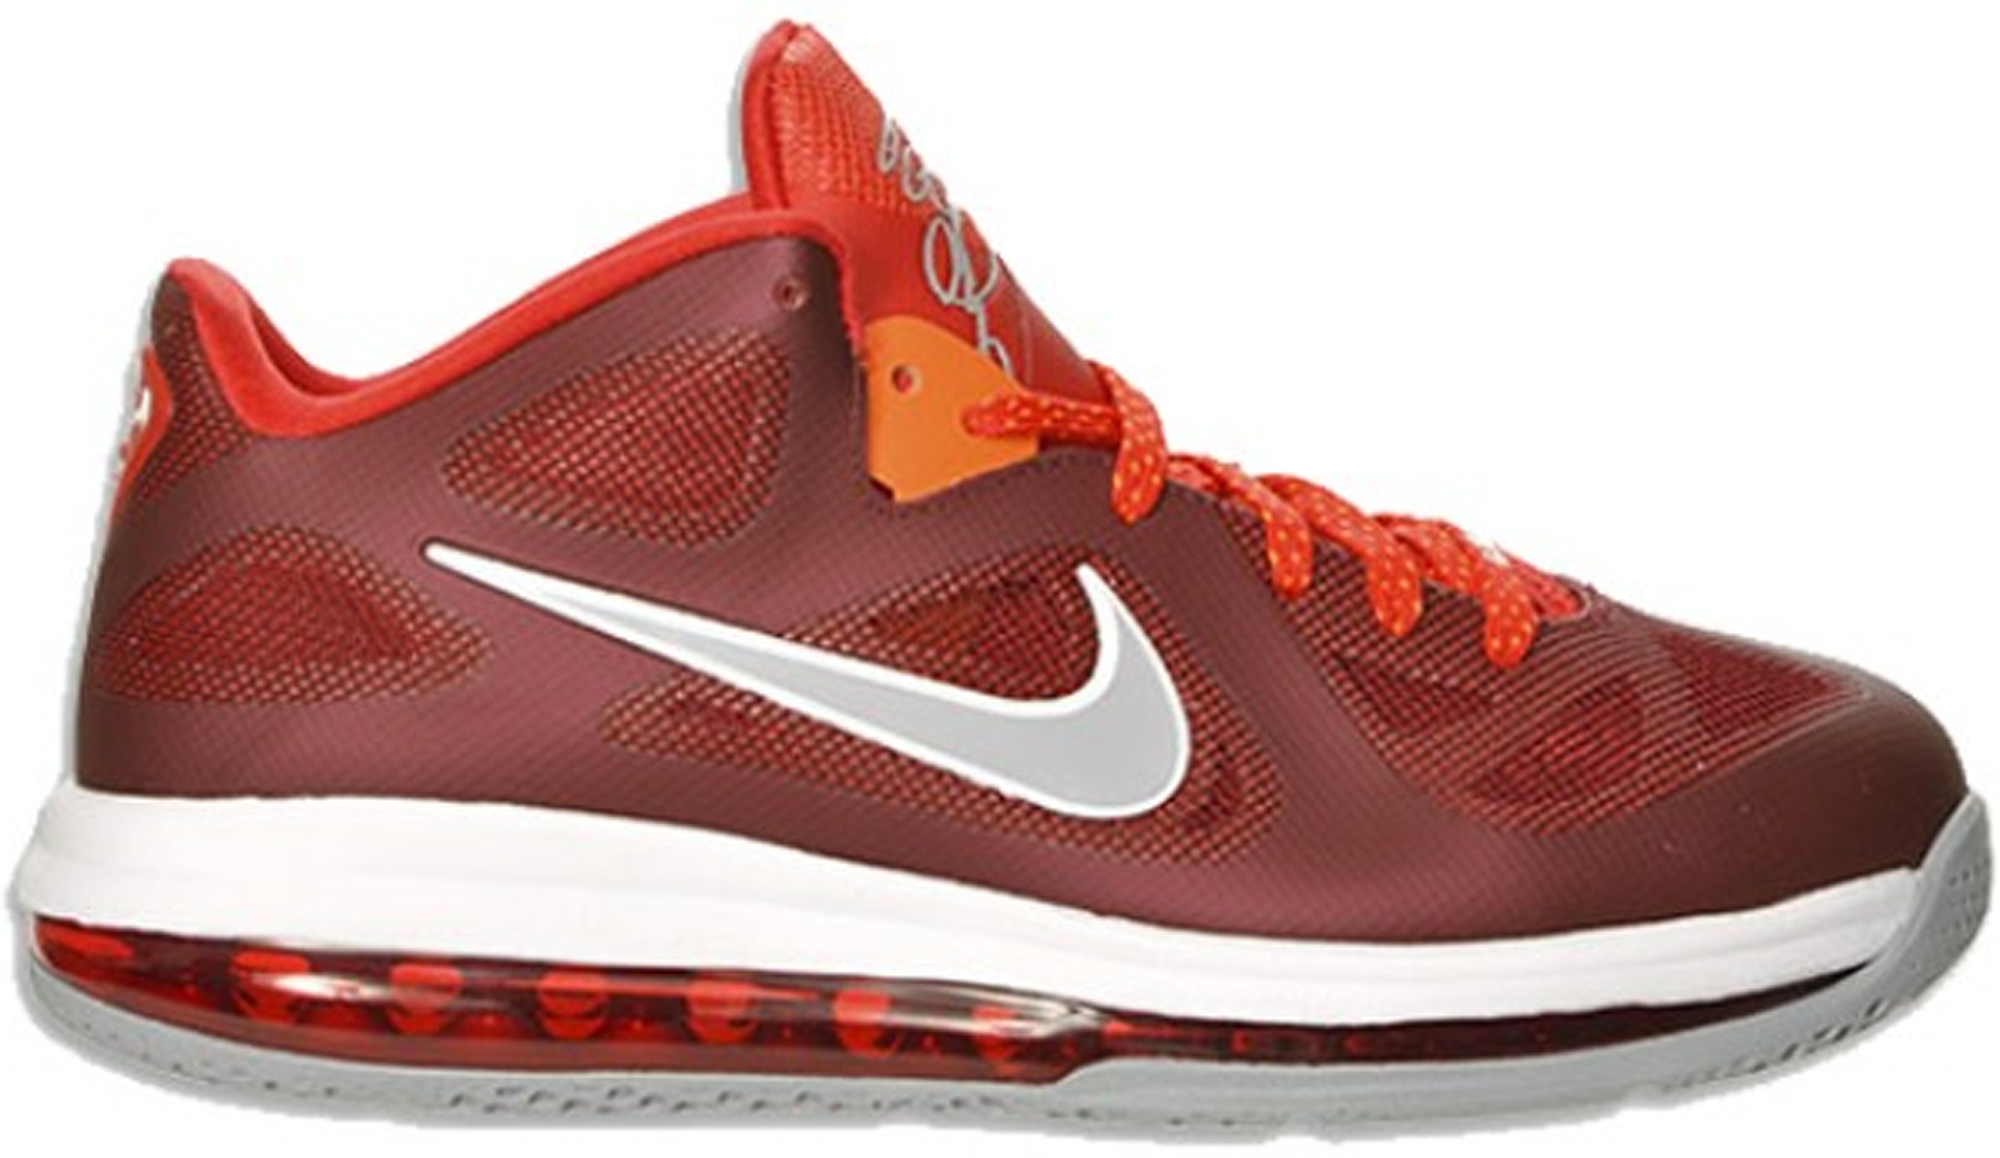 lebron 9 low for sale